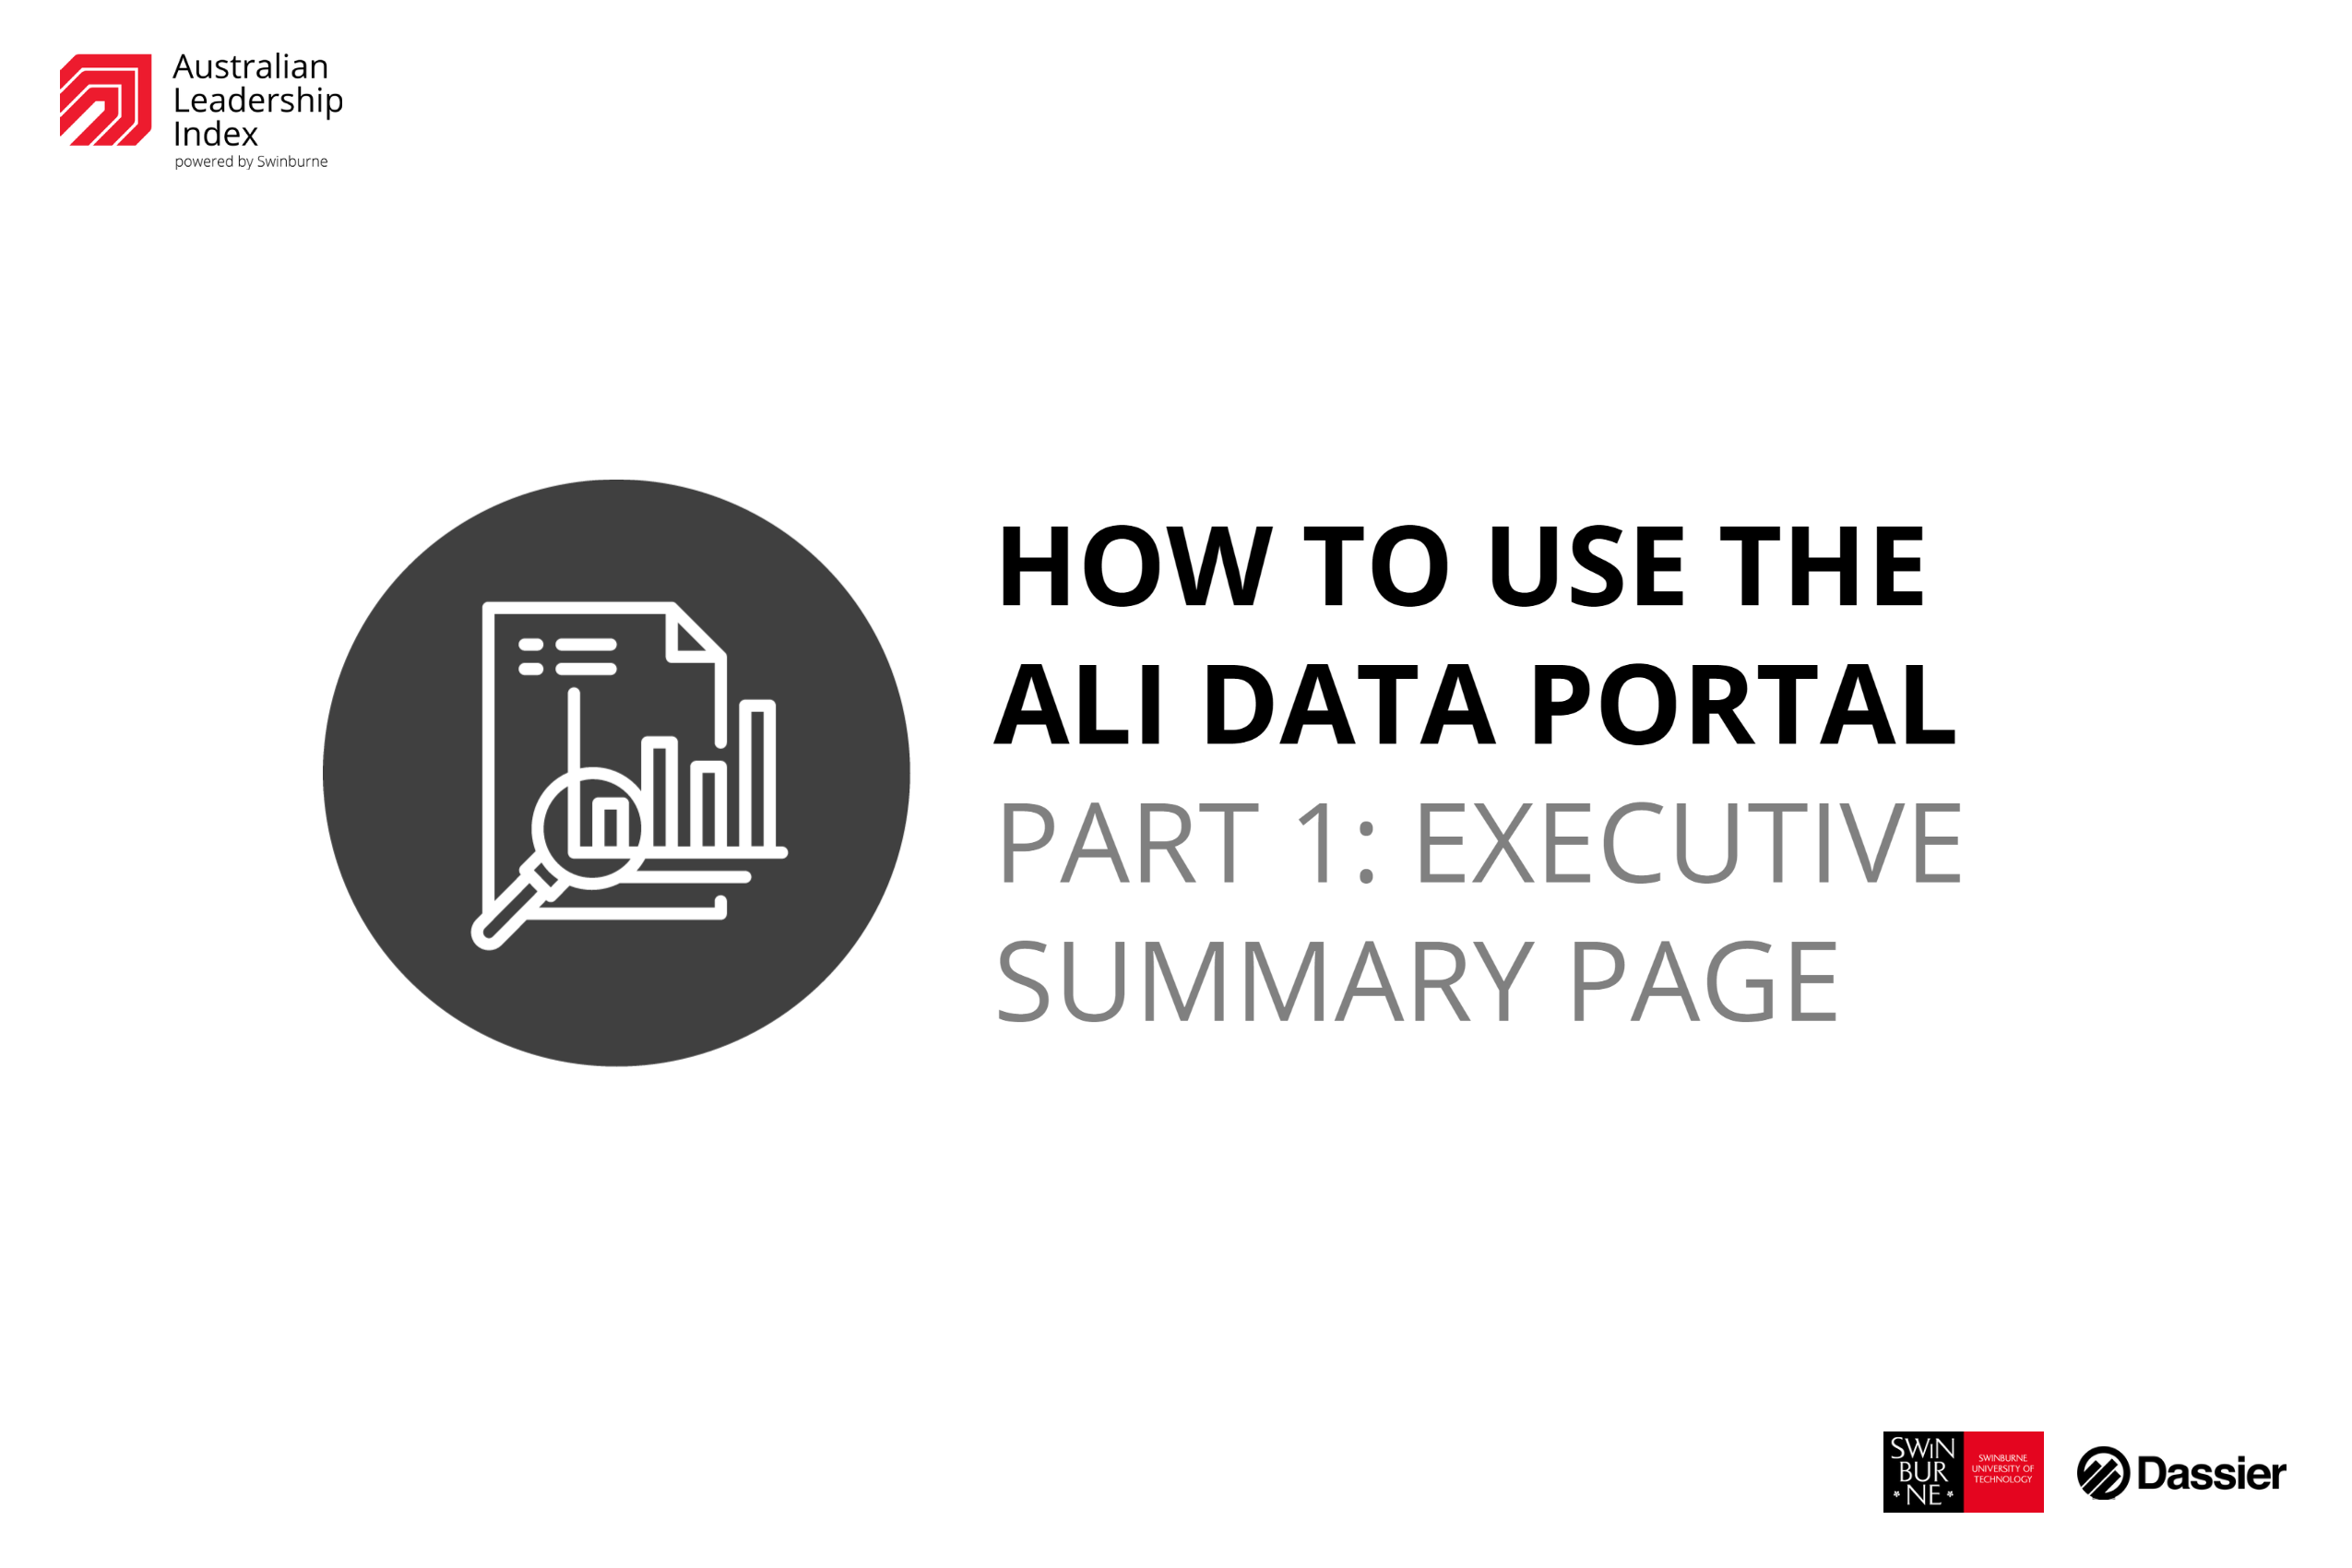 How-to-Use-the-ALI-Data-Portal-Part-1-Executive-Summary-Page